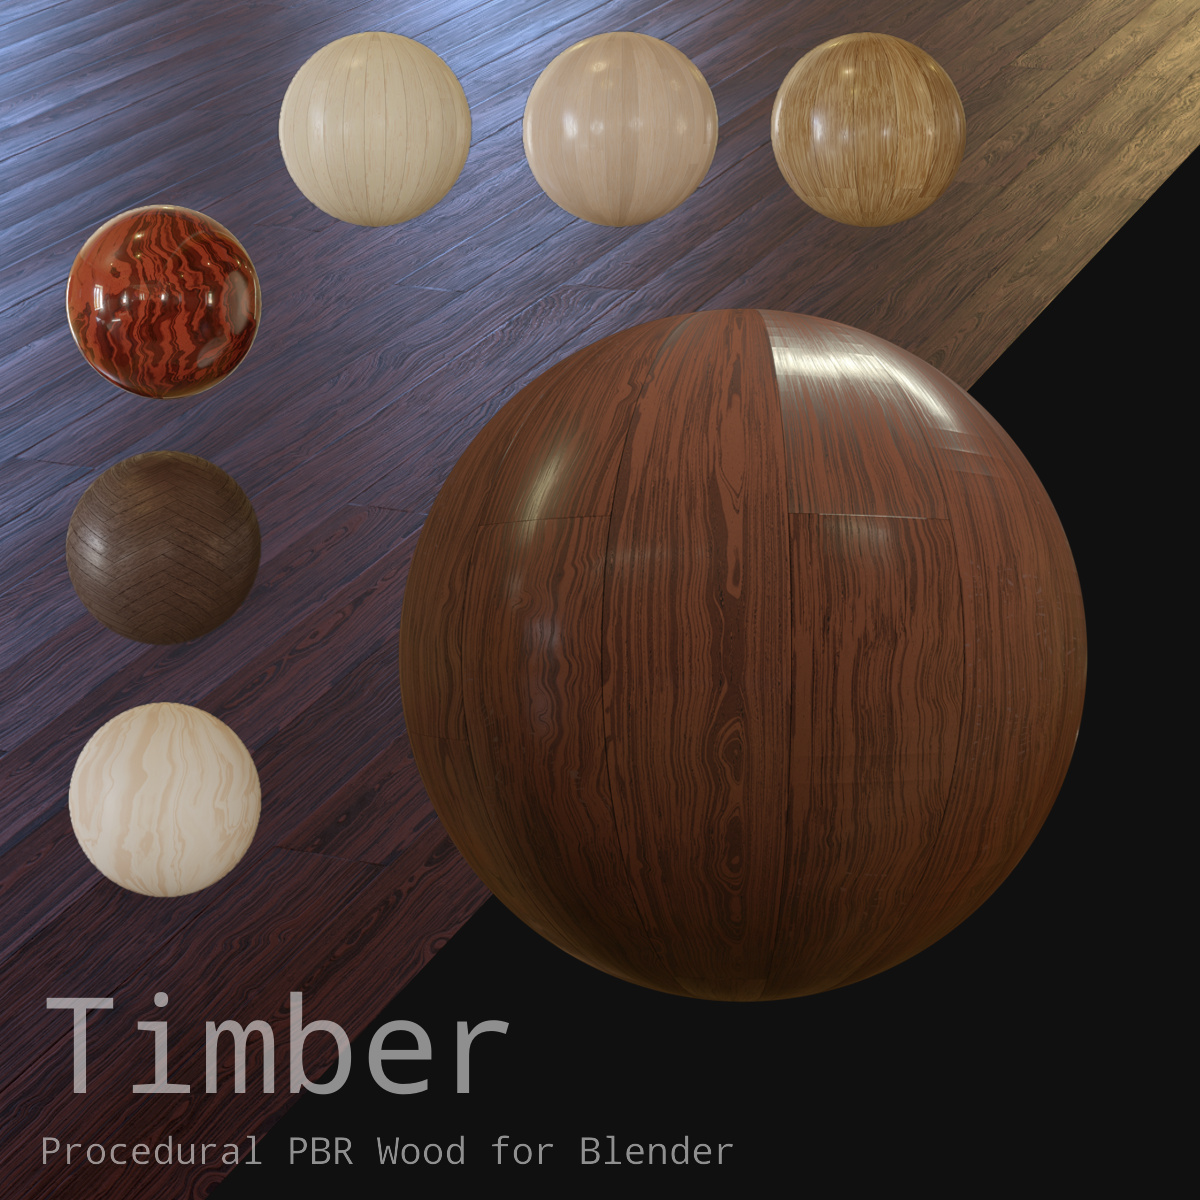 Timber - A Realistic Procedural PBR Wood Material links included) - Finished Projects - Blender Artists Community